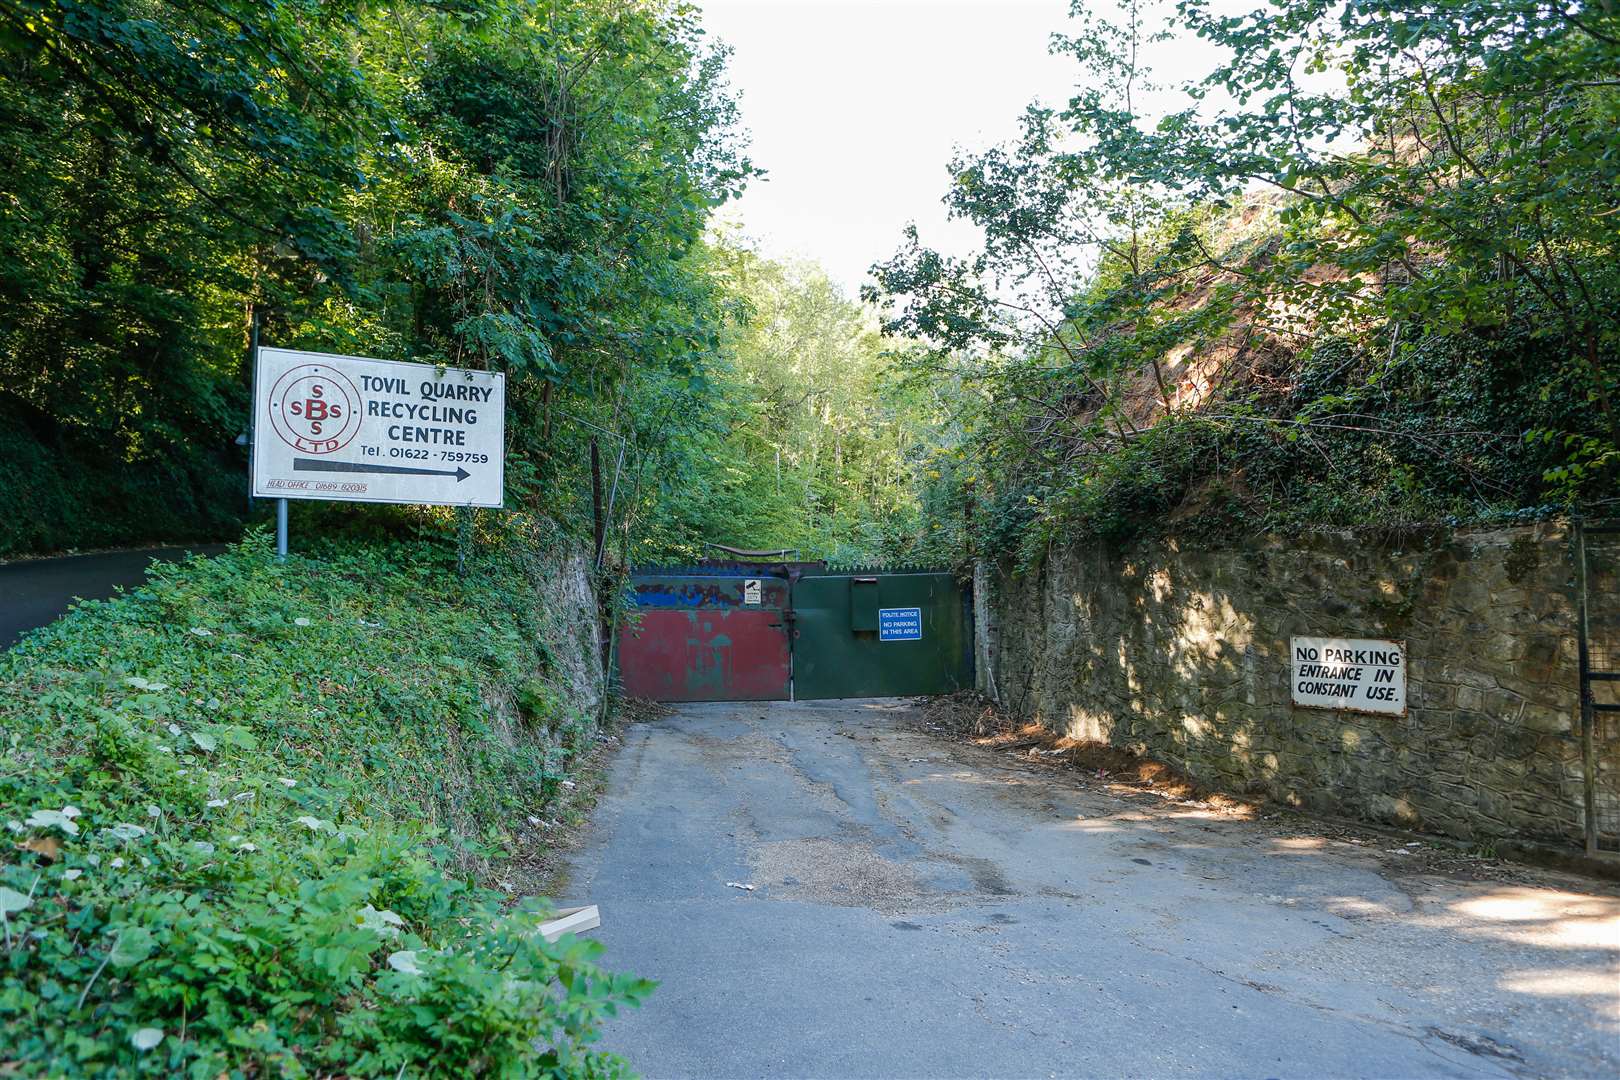 The existing entrance to the old quarry site